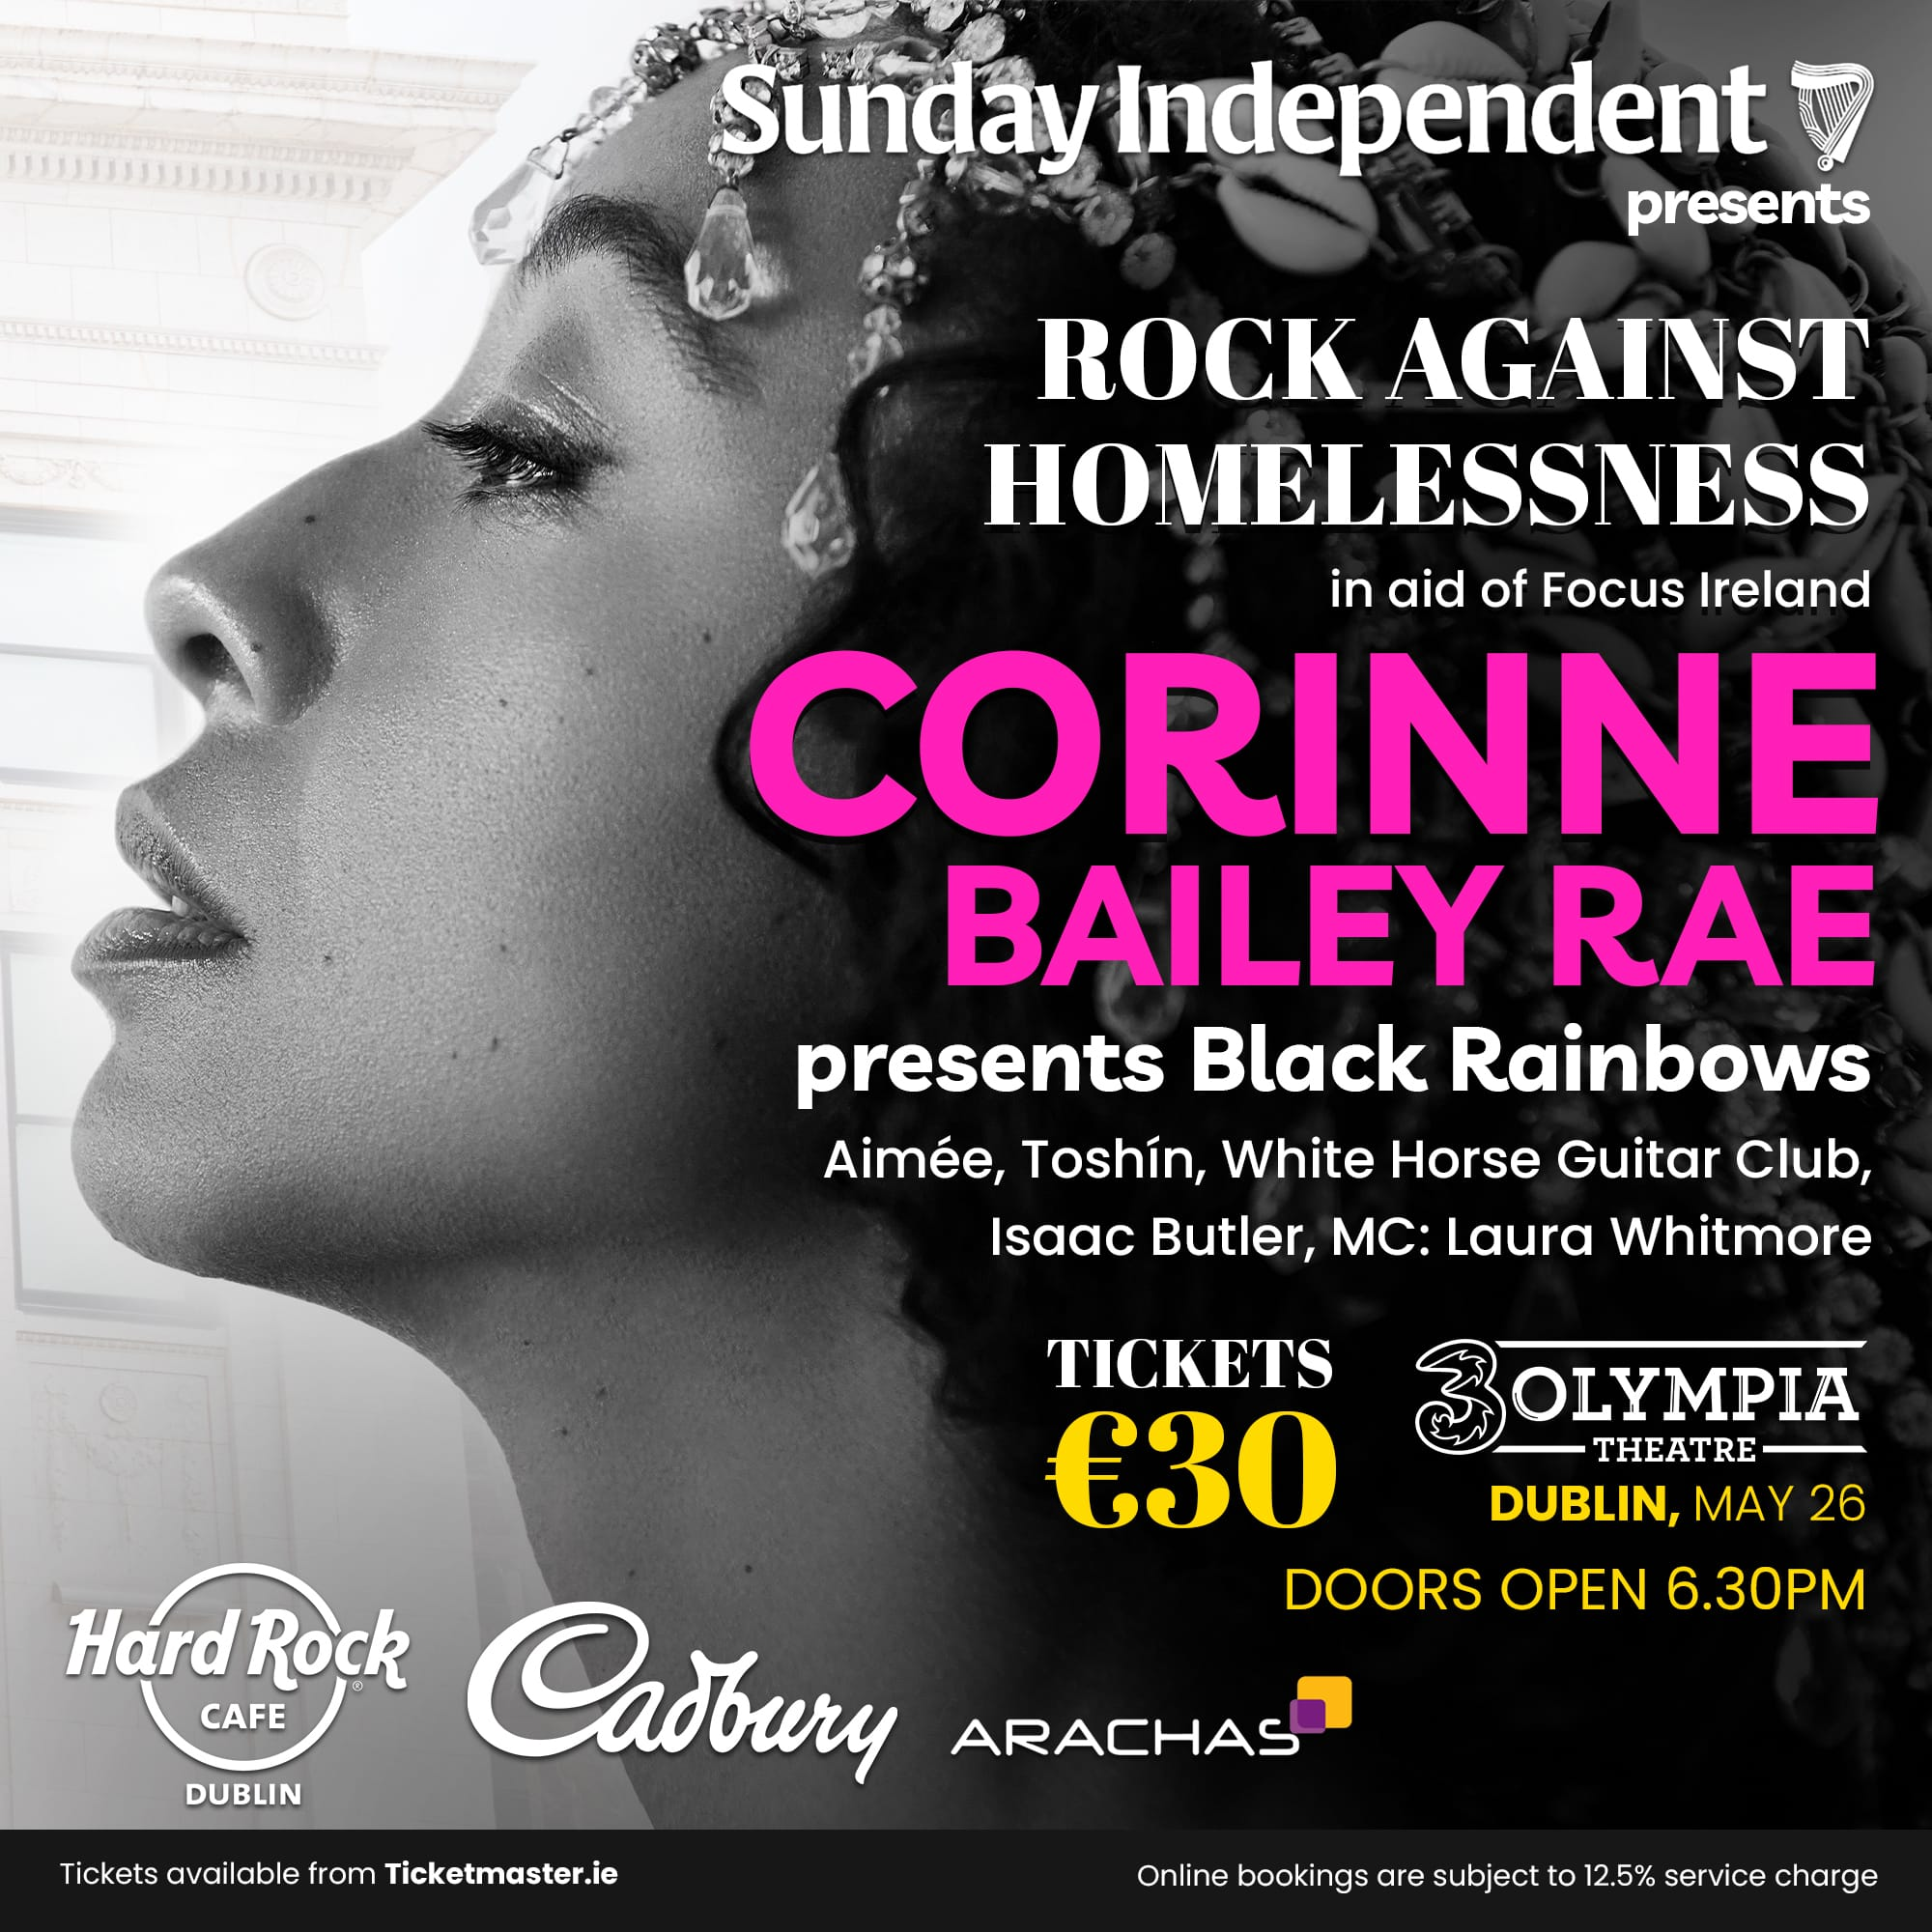 Poster for Rock Against Homelessness, featuring Corinne Bailey Rae.